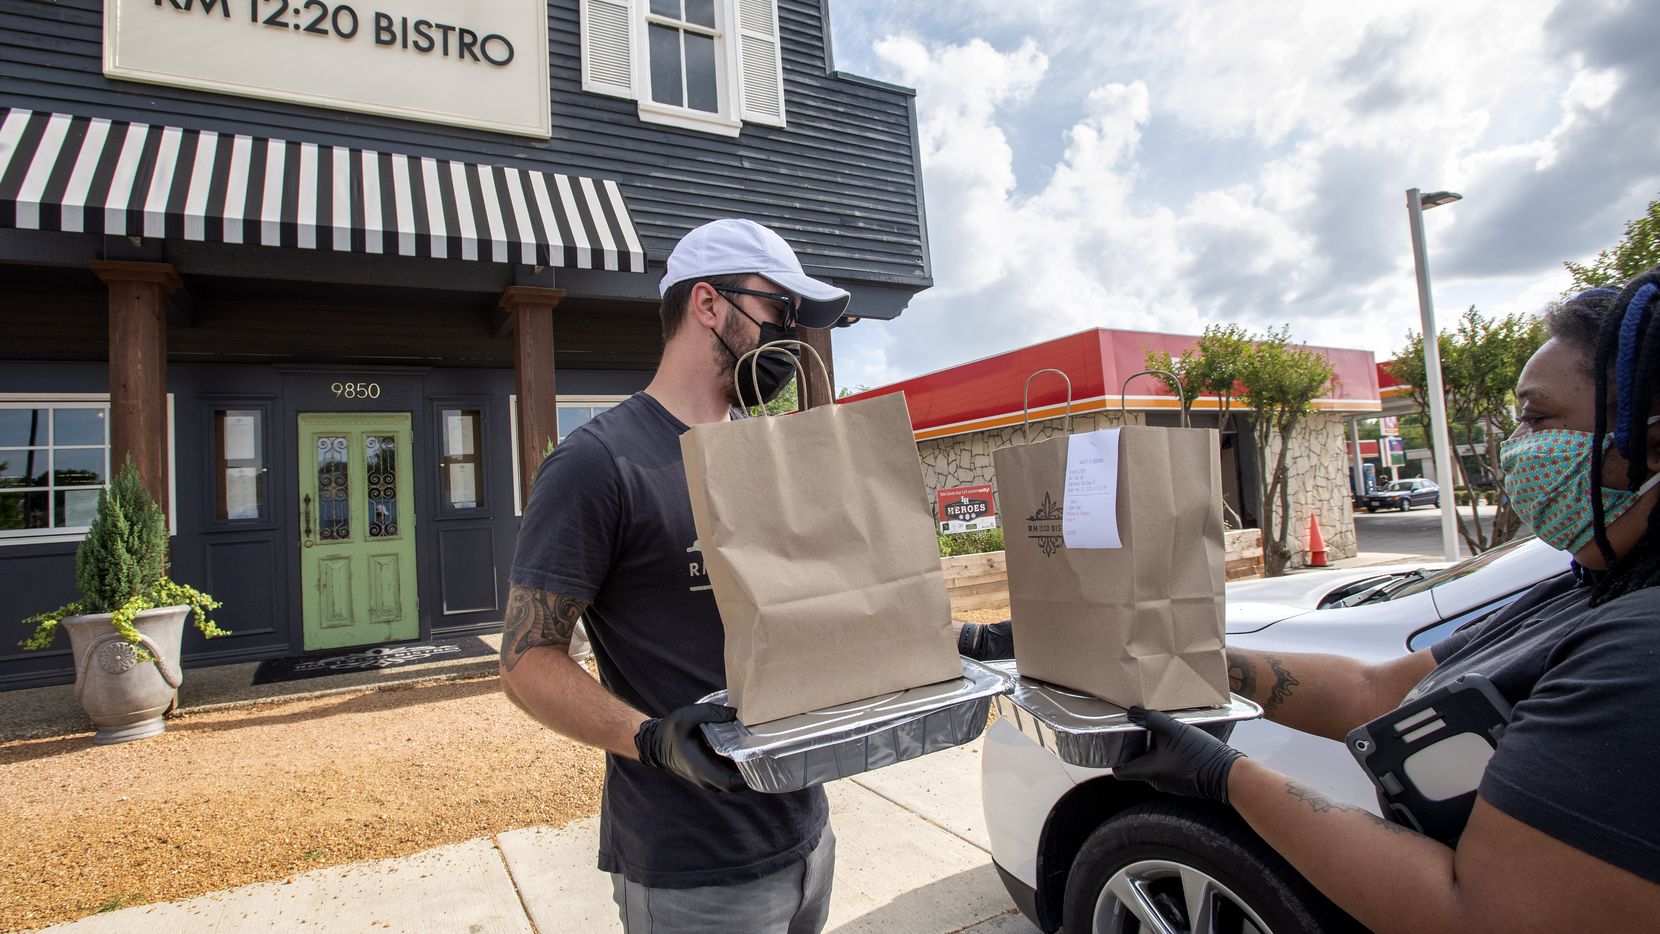 Tyler Bartlett and Kathleen Mathis, servers at RM 12:20 Bistro, deliver a curbside order to...